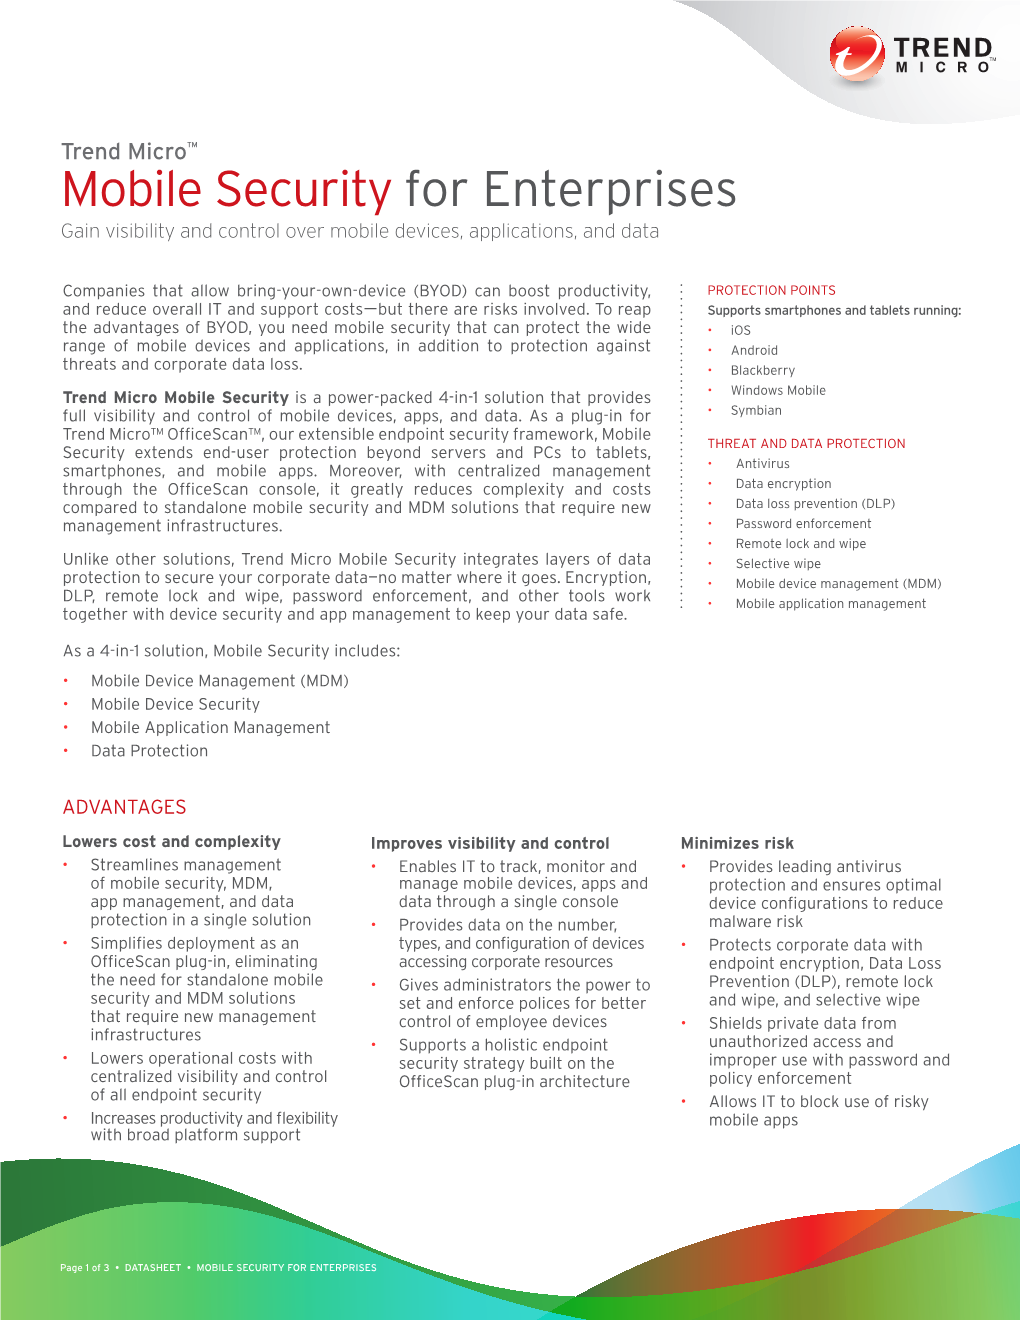 Mobile Security and Mobile Device Management (MDM)